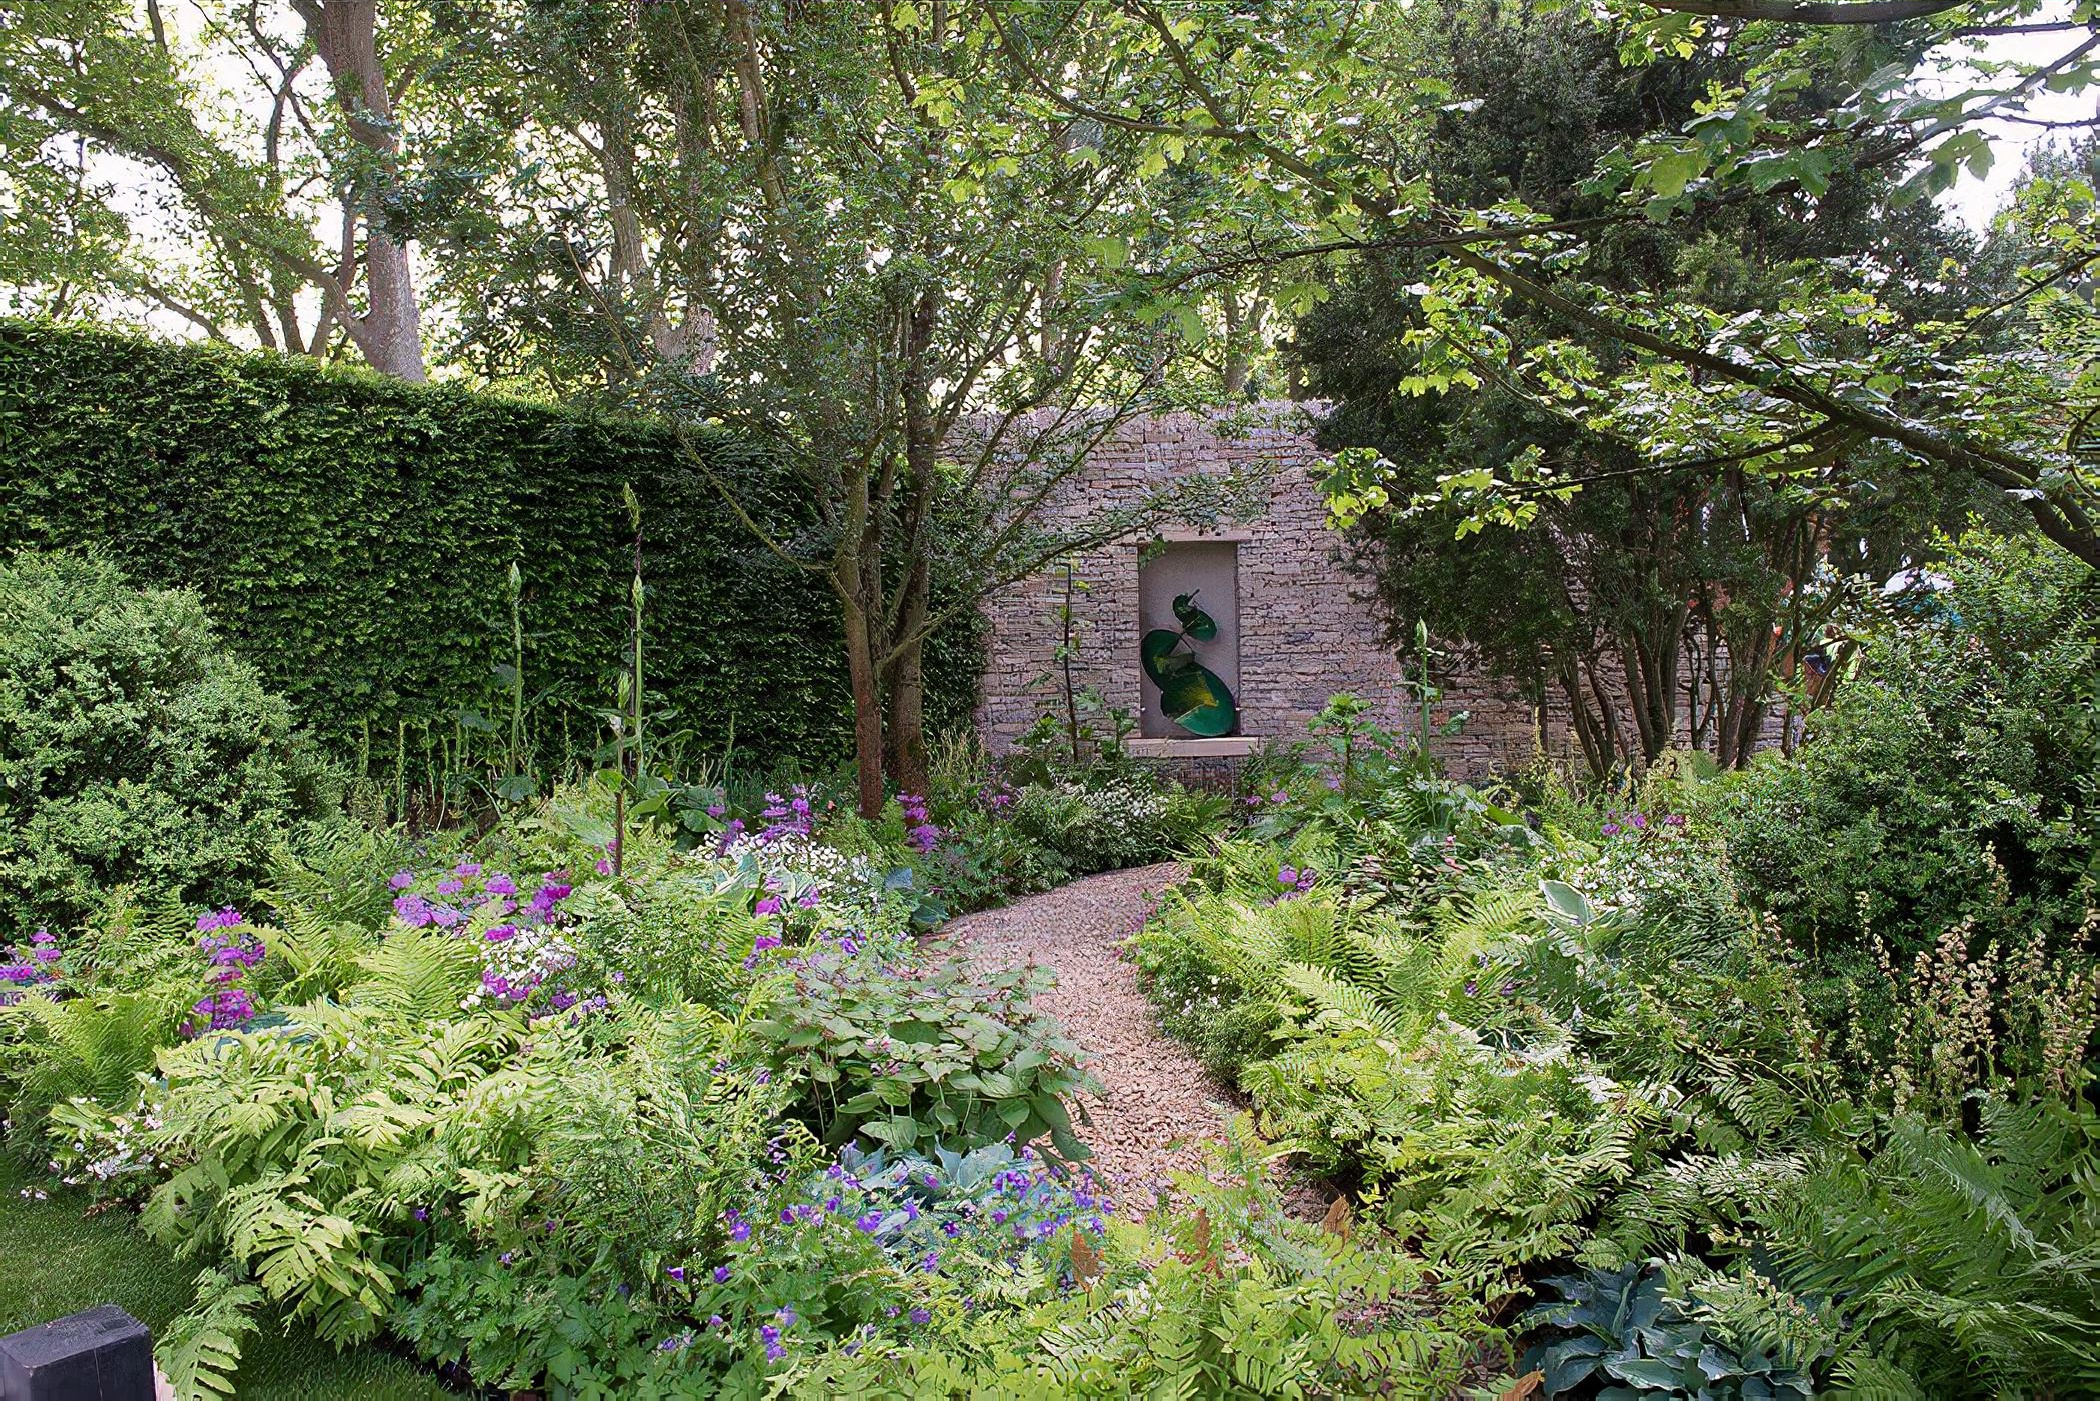 Morgan Stanley is returning to Chelsea Flower Show for a third consecutive year with ‘The Morgan Stanley Garden’ designed by Chris Beardshaw. 